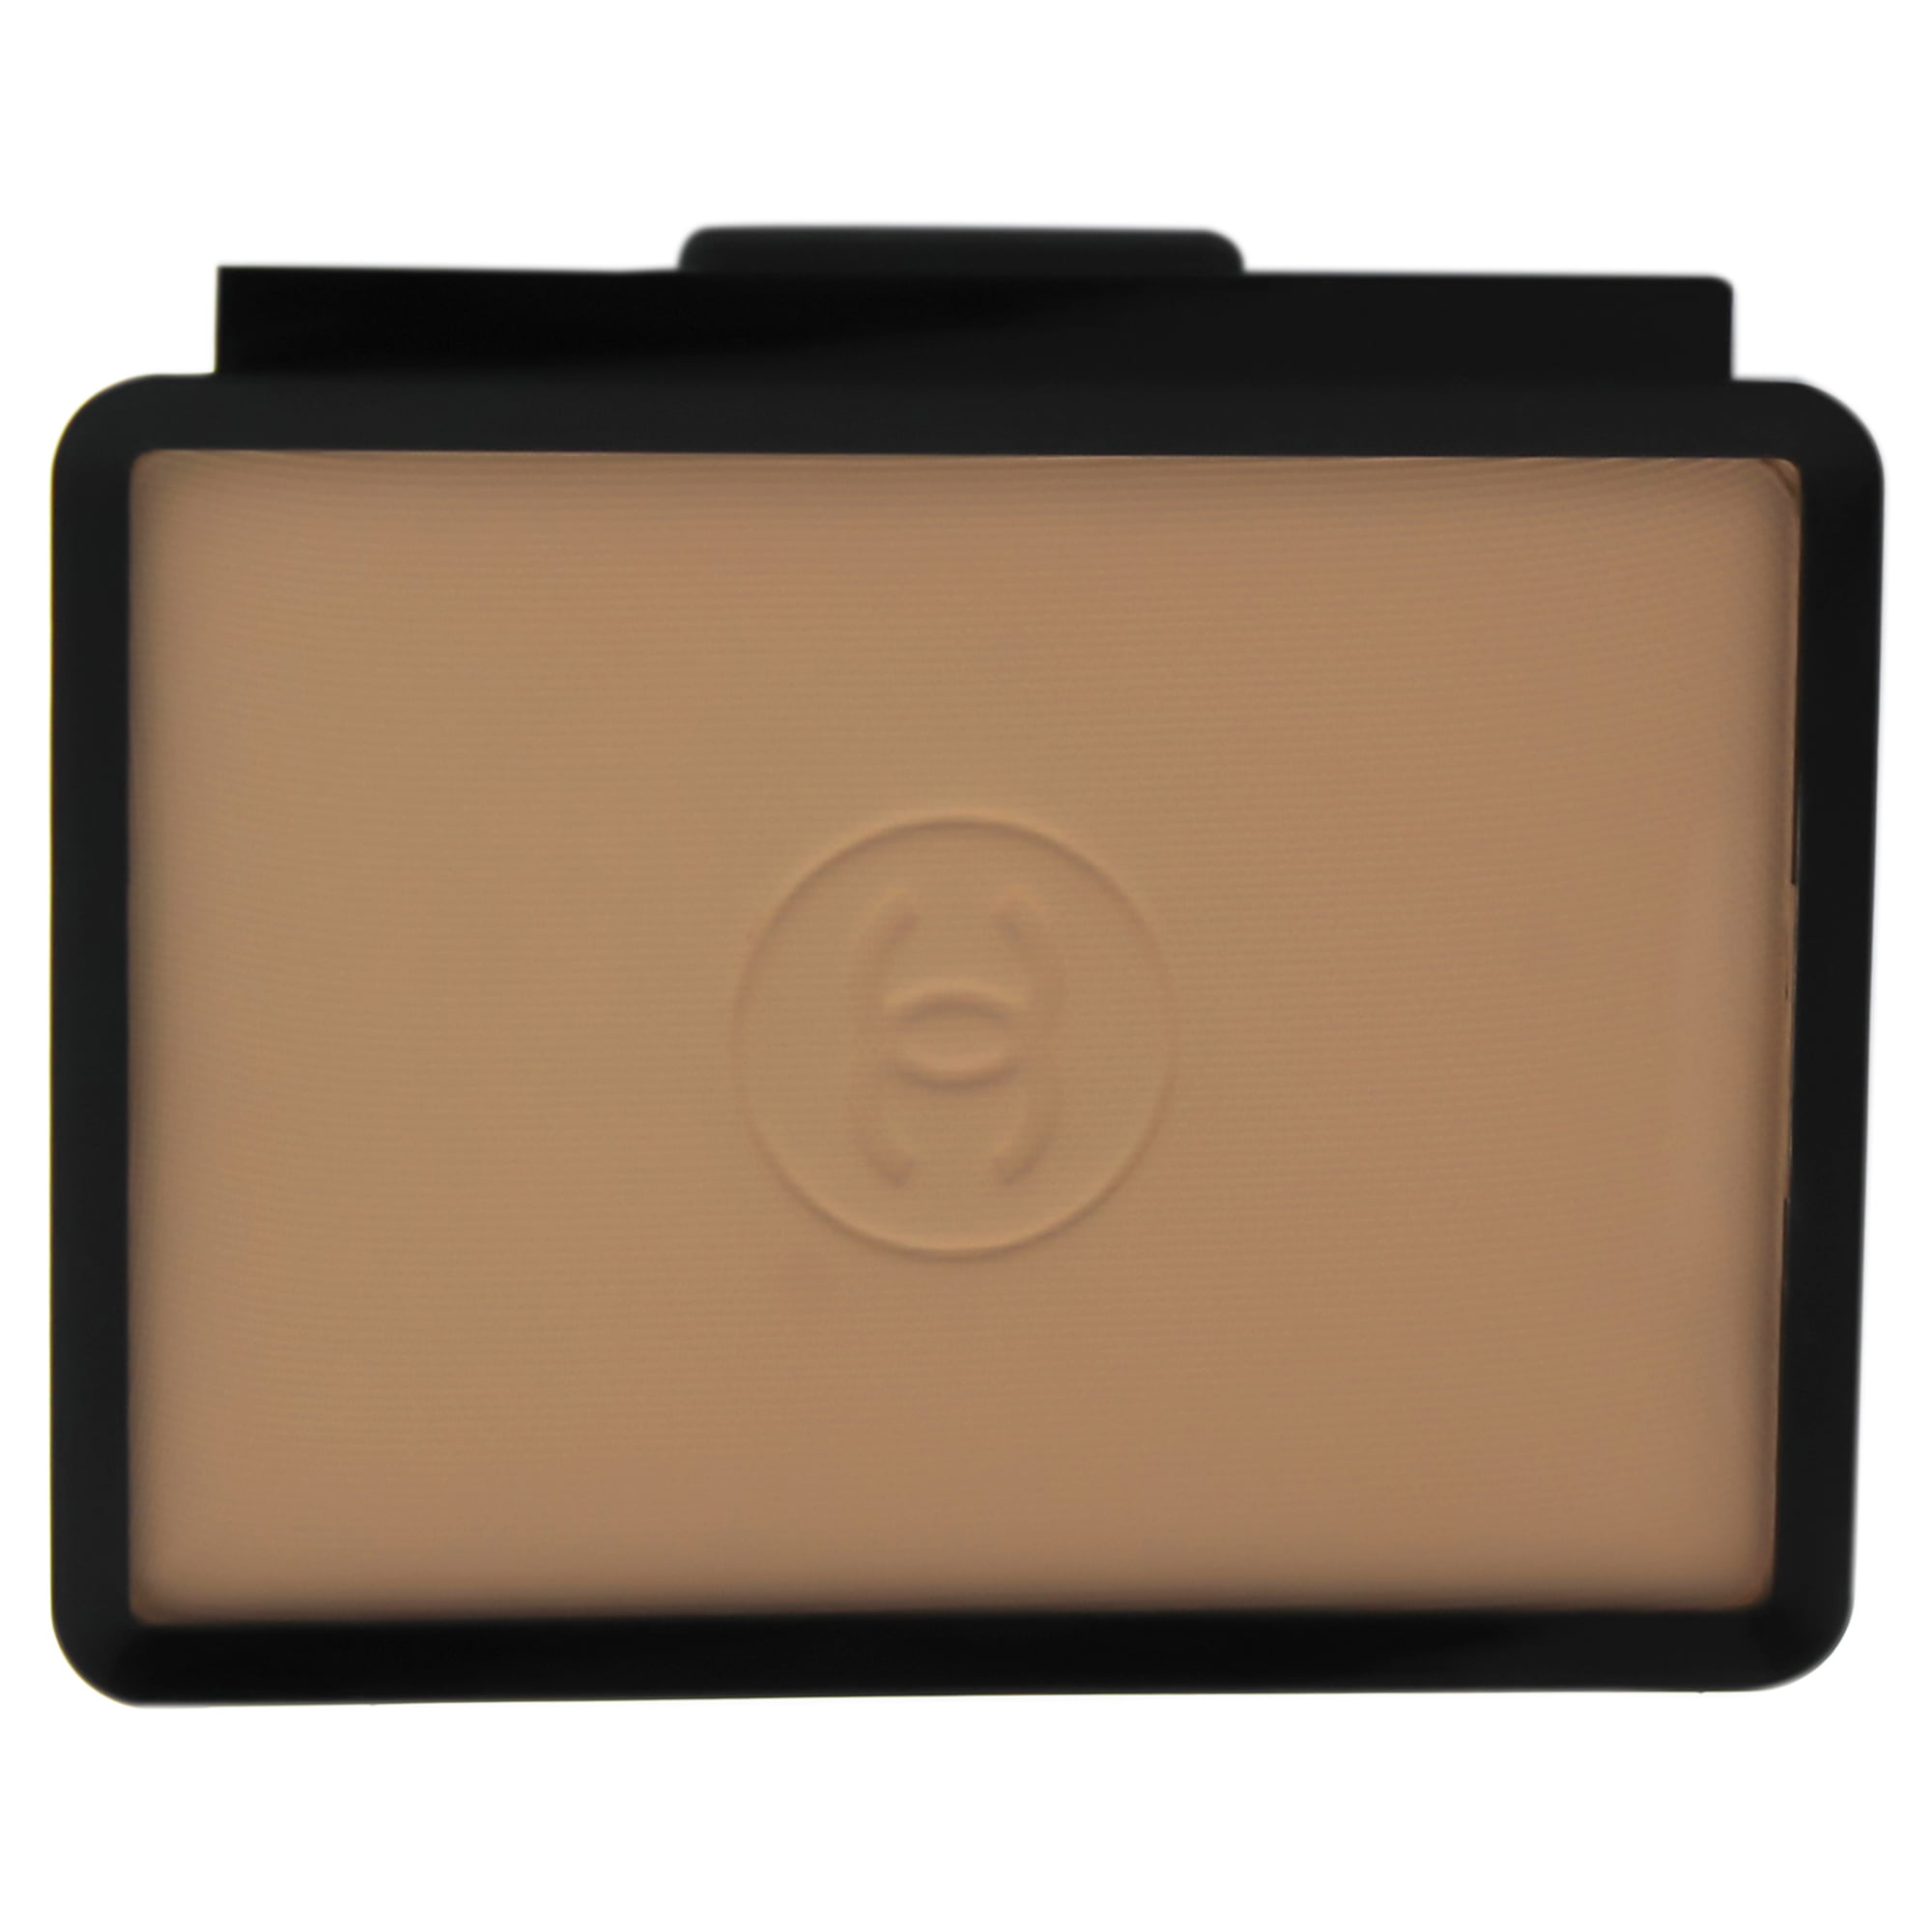 Le Teint Ultra Compact Foundation SPF 15 - 20 Beige by Chanel for